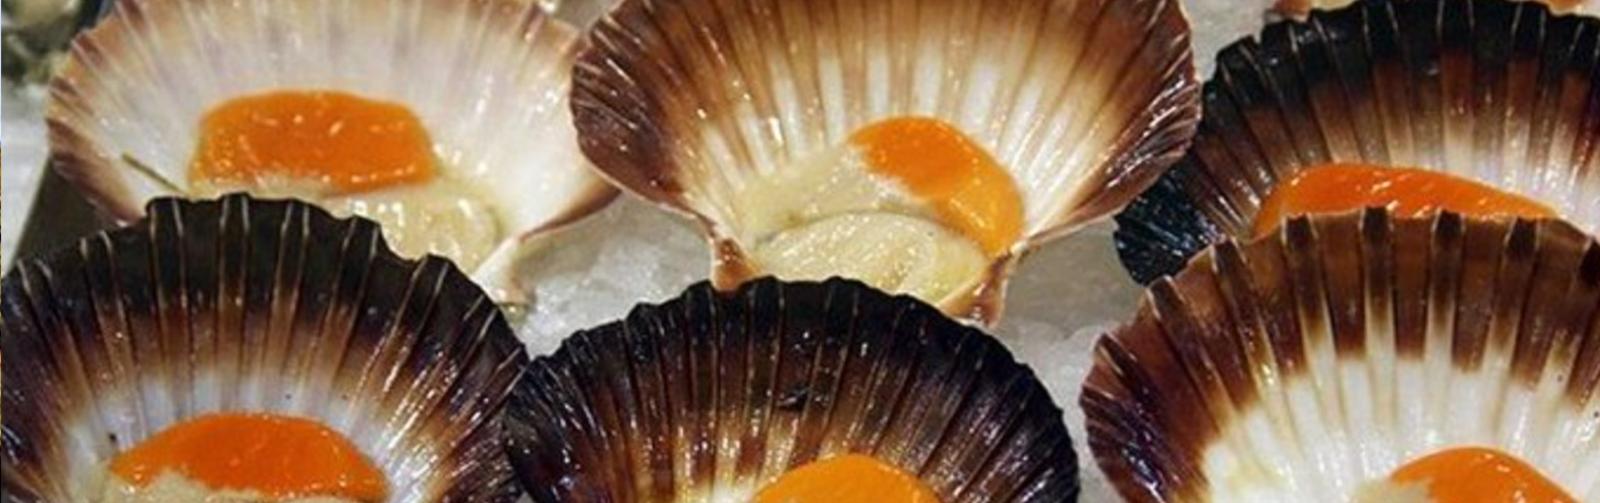 Scallops in the half shell